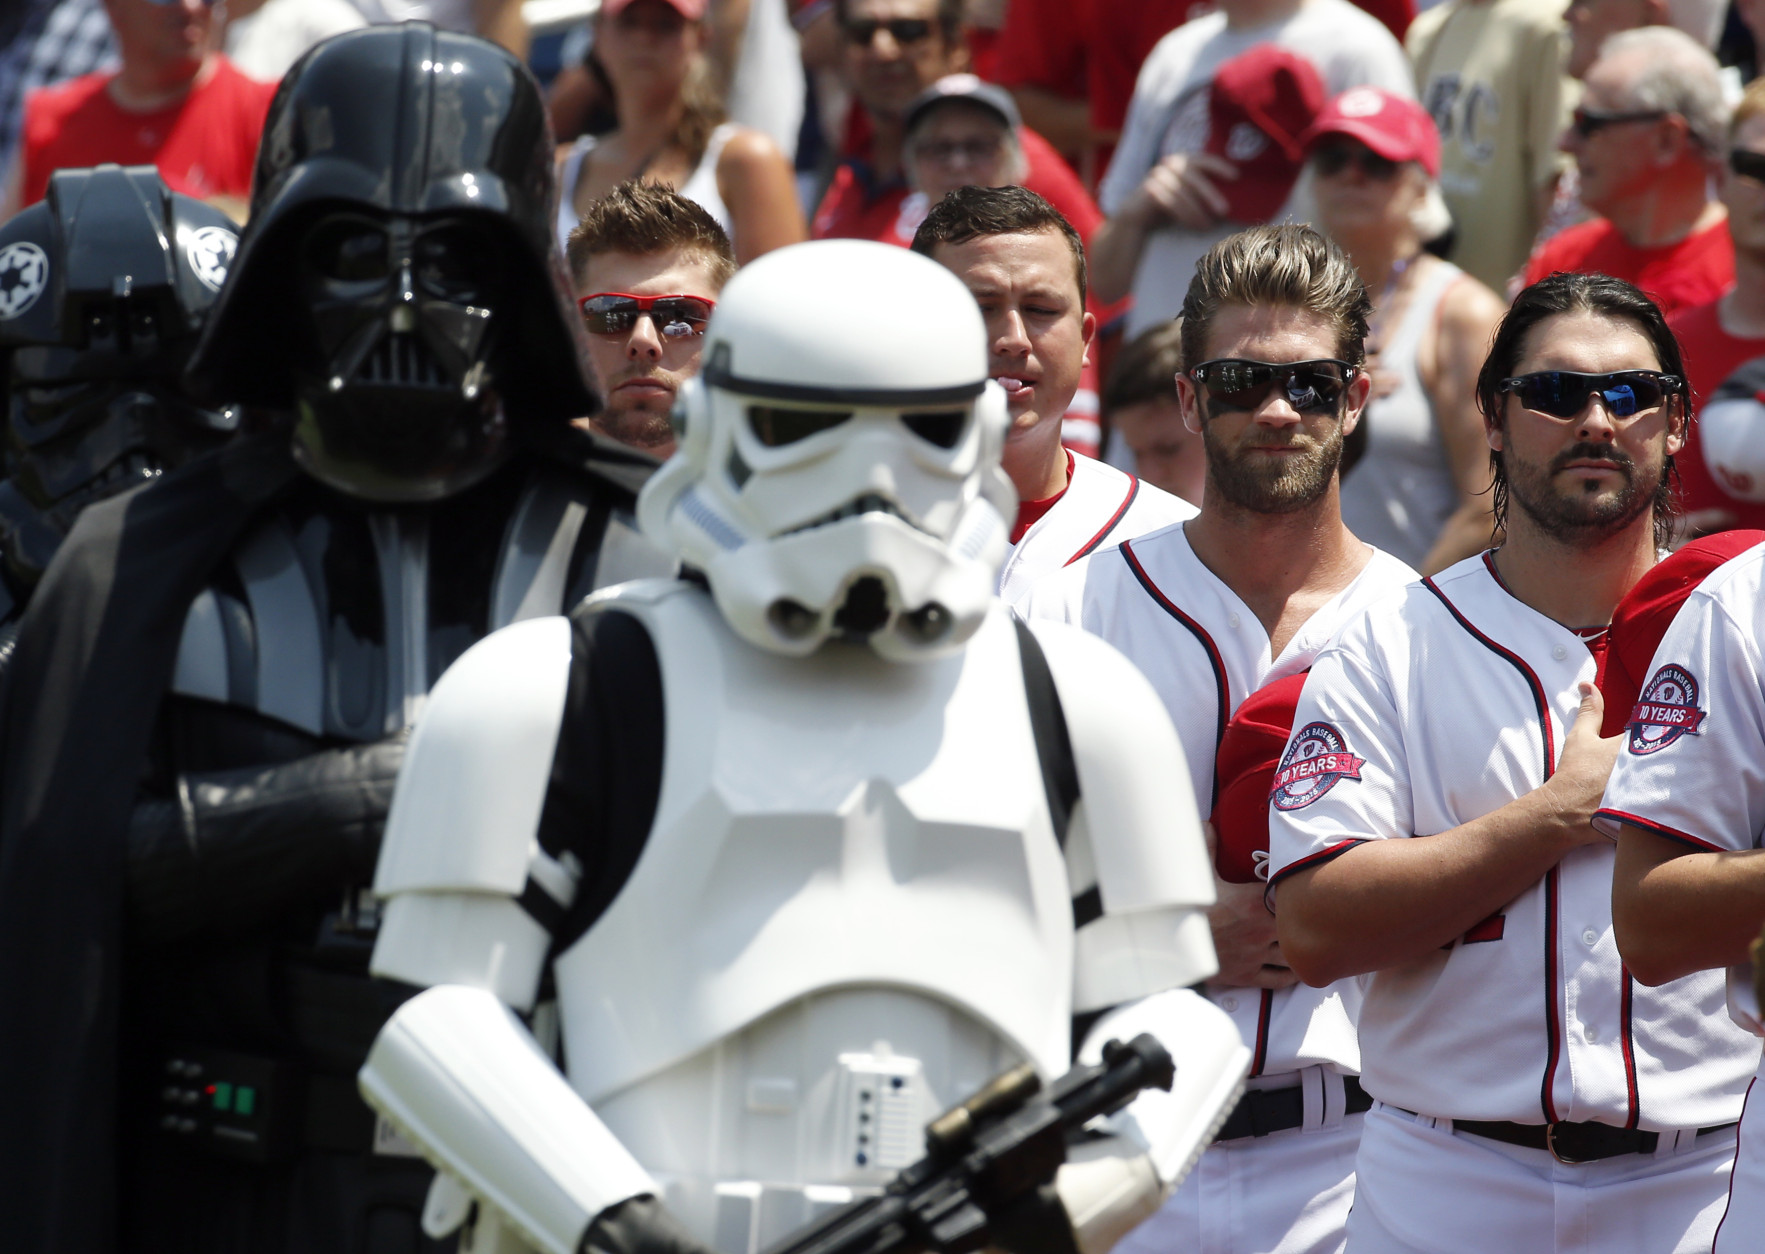 Washington Nationals' Bryce Harper, second from right, and Tanner Roark, right, stand with Darth Vader, left, and a Stormtrooper in costume during the national anthem on Star Wars Day before a baseball game against the Los Angeles Dodgers at Nationals Park, Sunday, July 19, 2015, in Washington. (AP Photo/Alex Brandon)